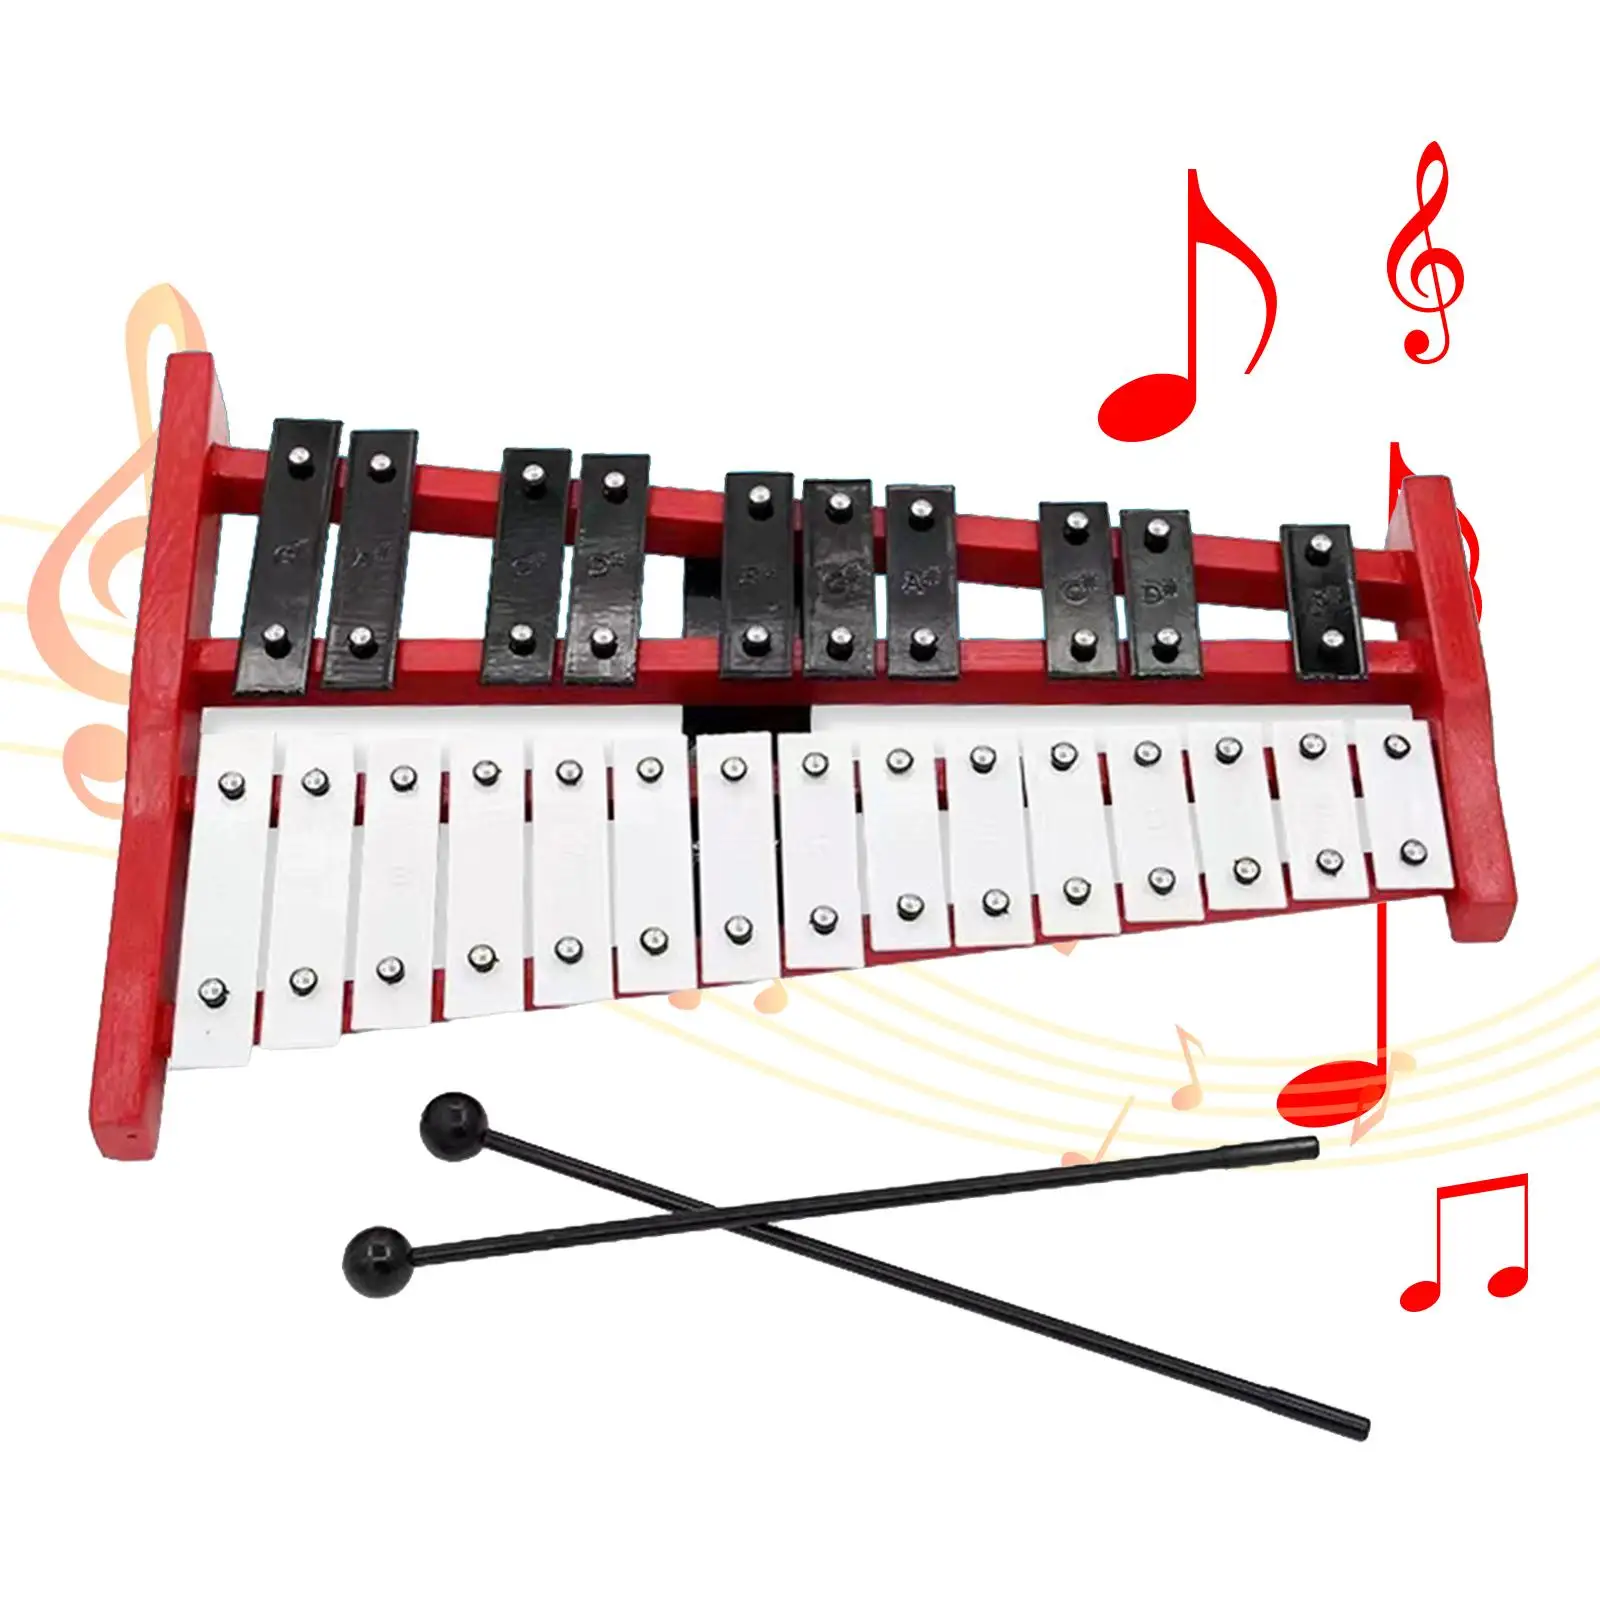 Glockenspiel Xylophone Kids Music Toy 25 Note for Music Lessons Home Outside